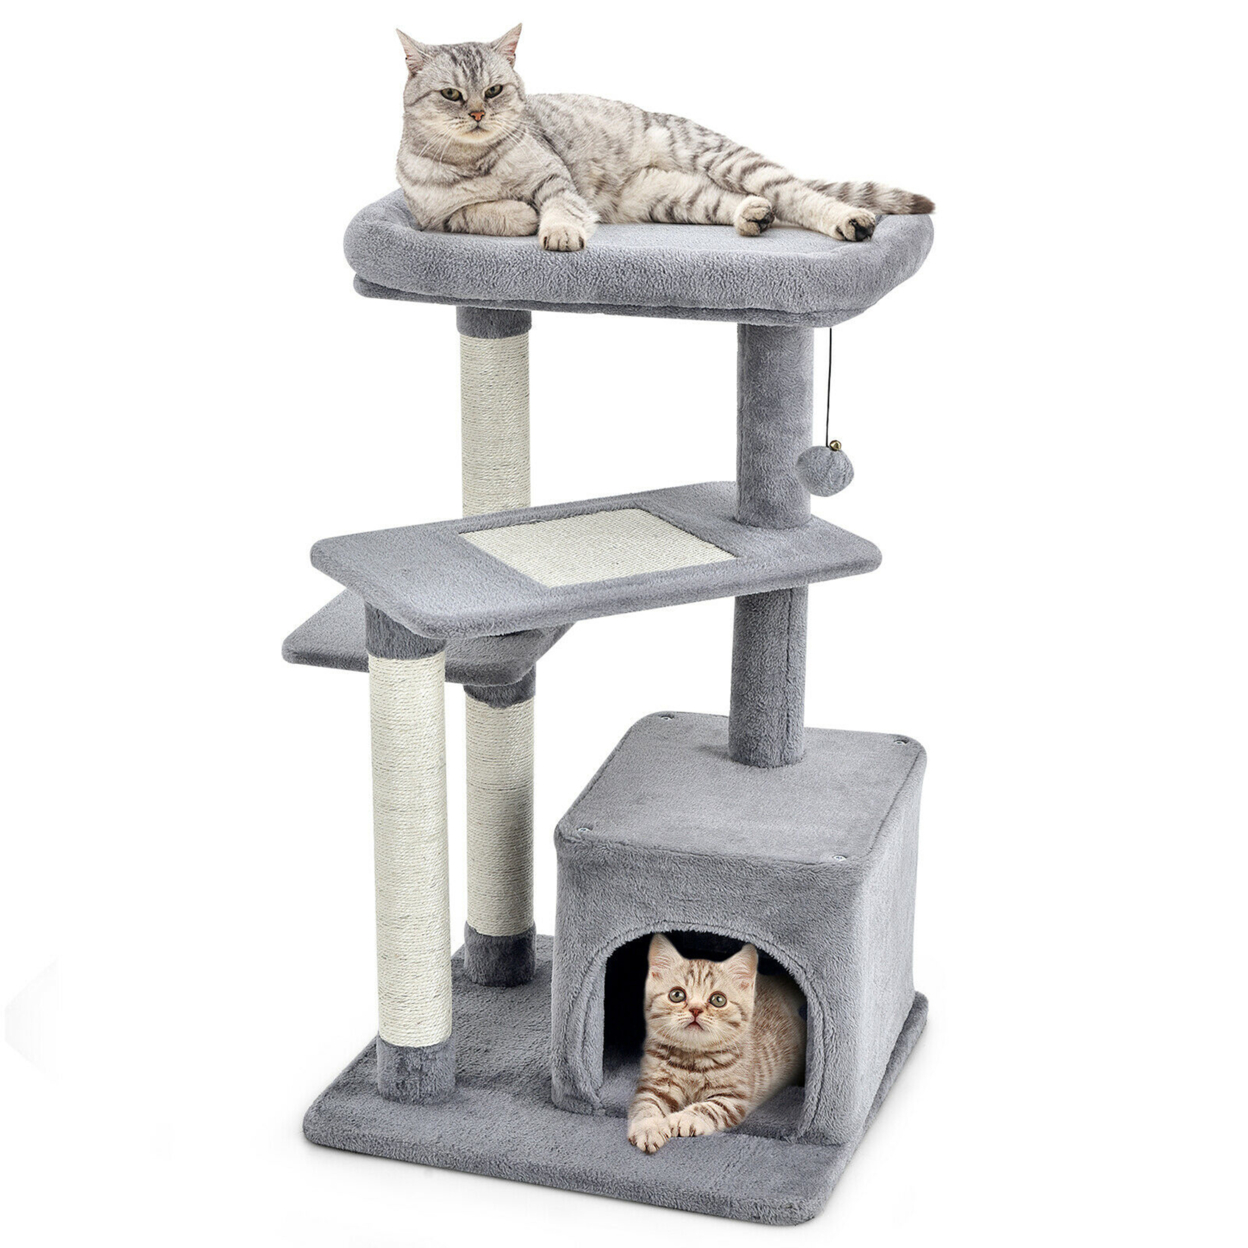 Cat Tree Indoor Activity Cat Tower W/ Perch & Hanging Ball For Play Rest